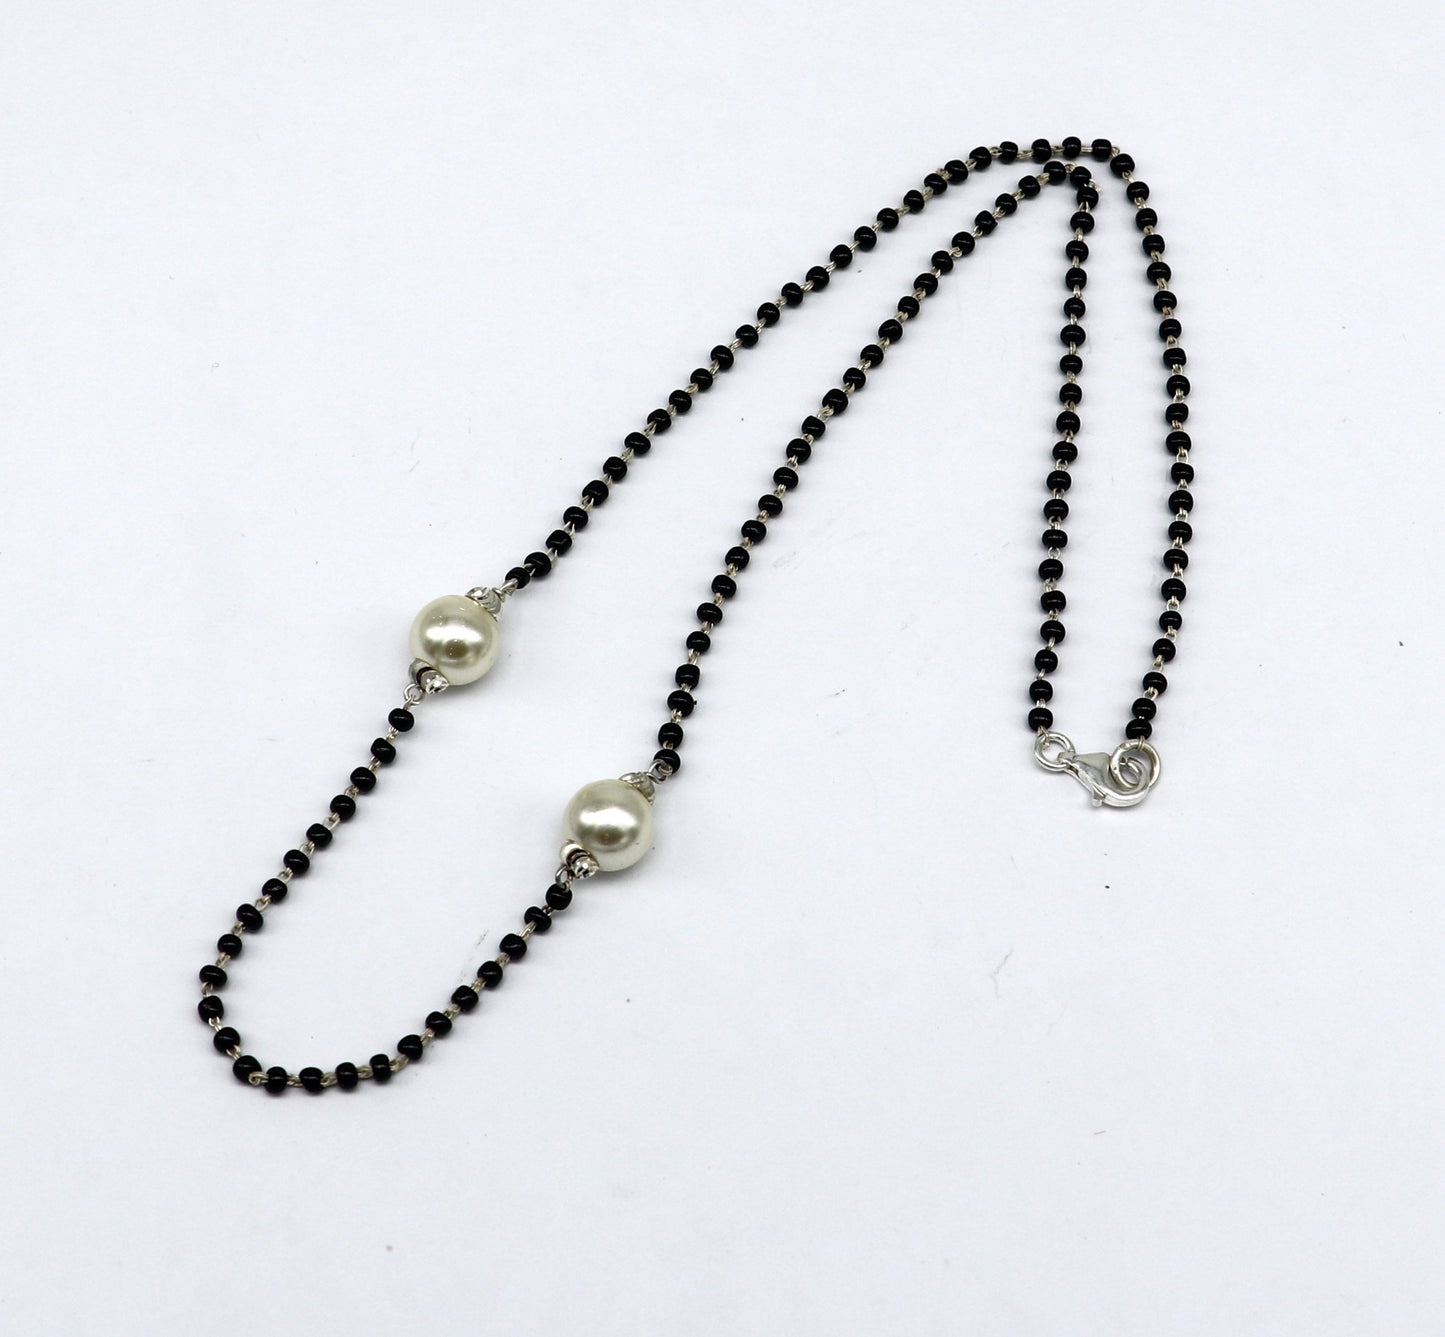 925 sterling silver black beads chain necklace, vintage stylish fancy necklace, traditional style brides Mangalsutra necklace India set218 - TRIBAL ORNAMENTS